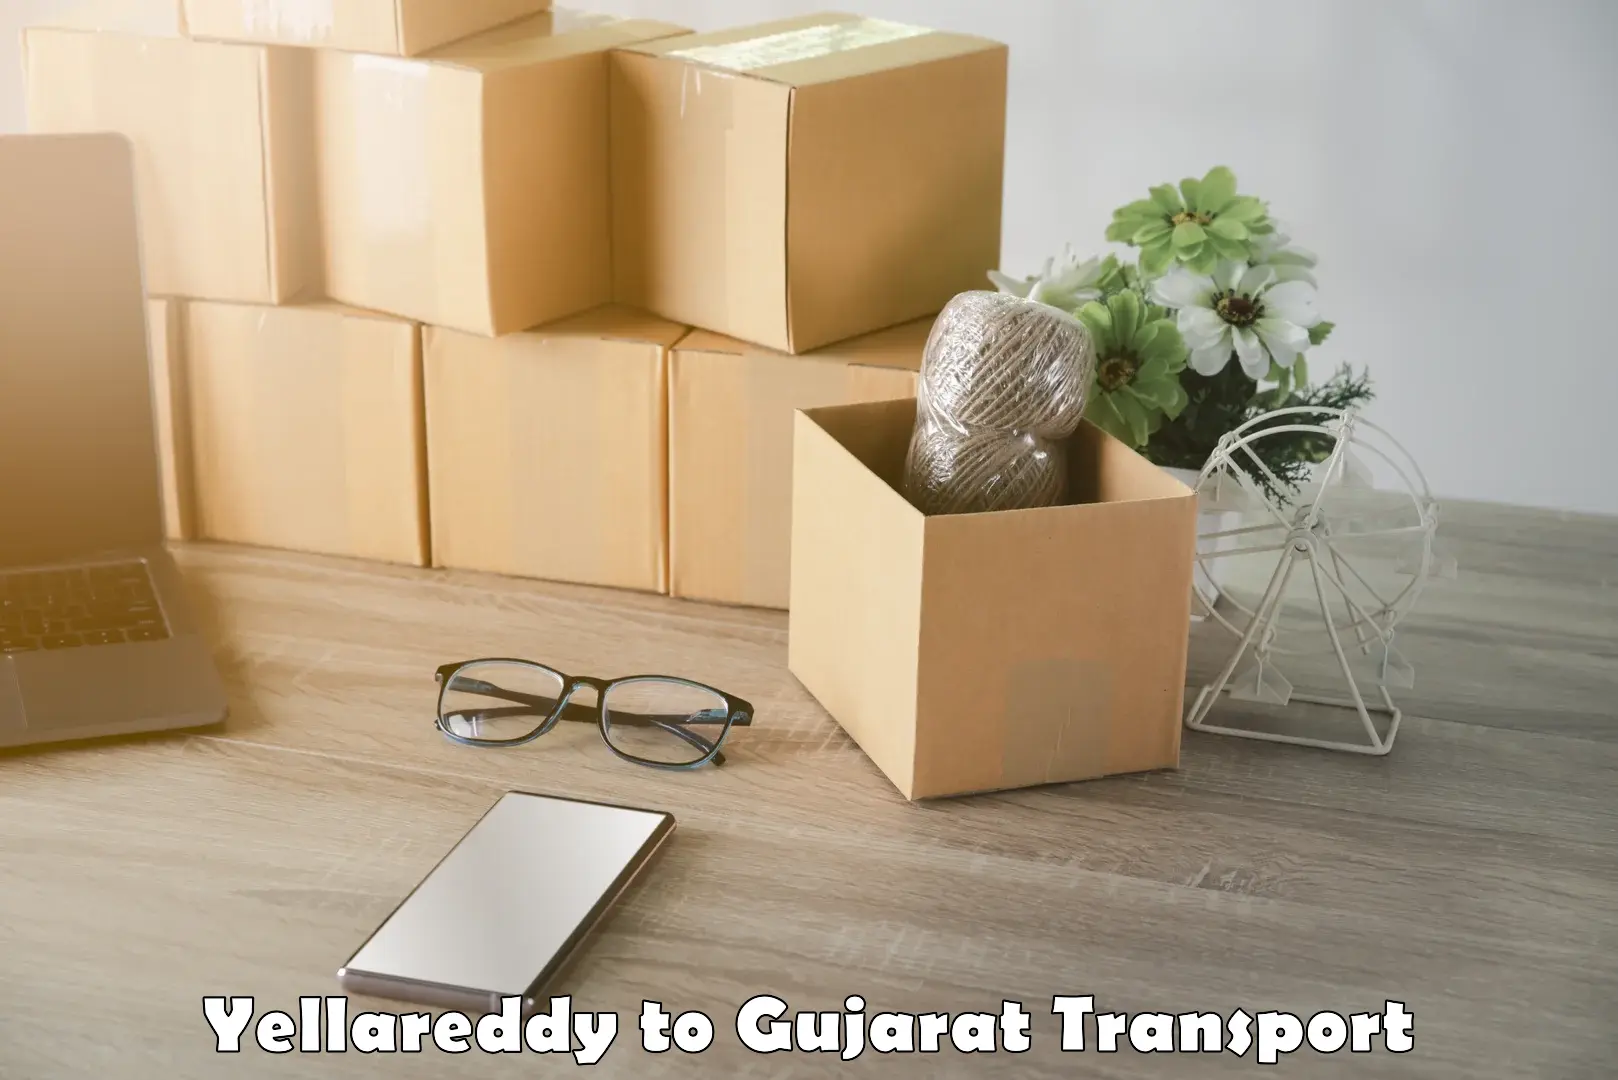 Package delivery services in Yellareddy to Jetpur